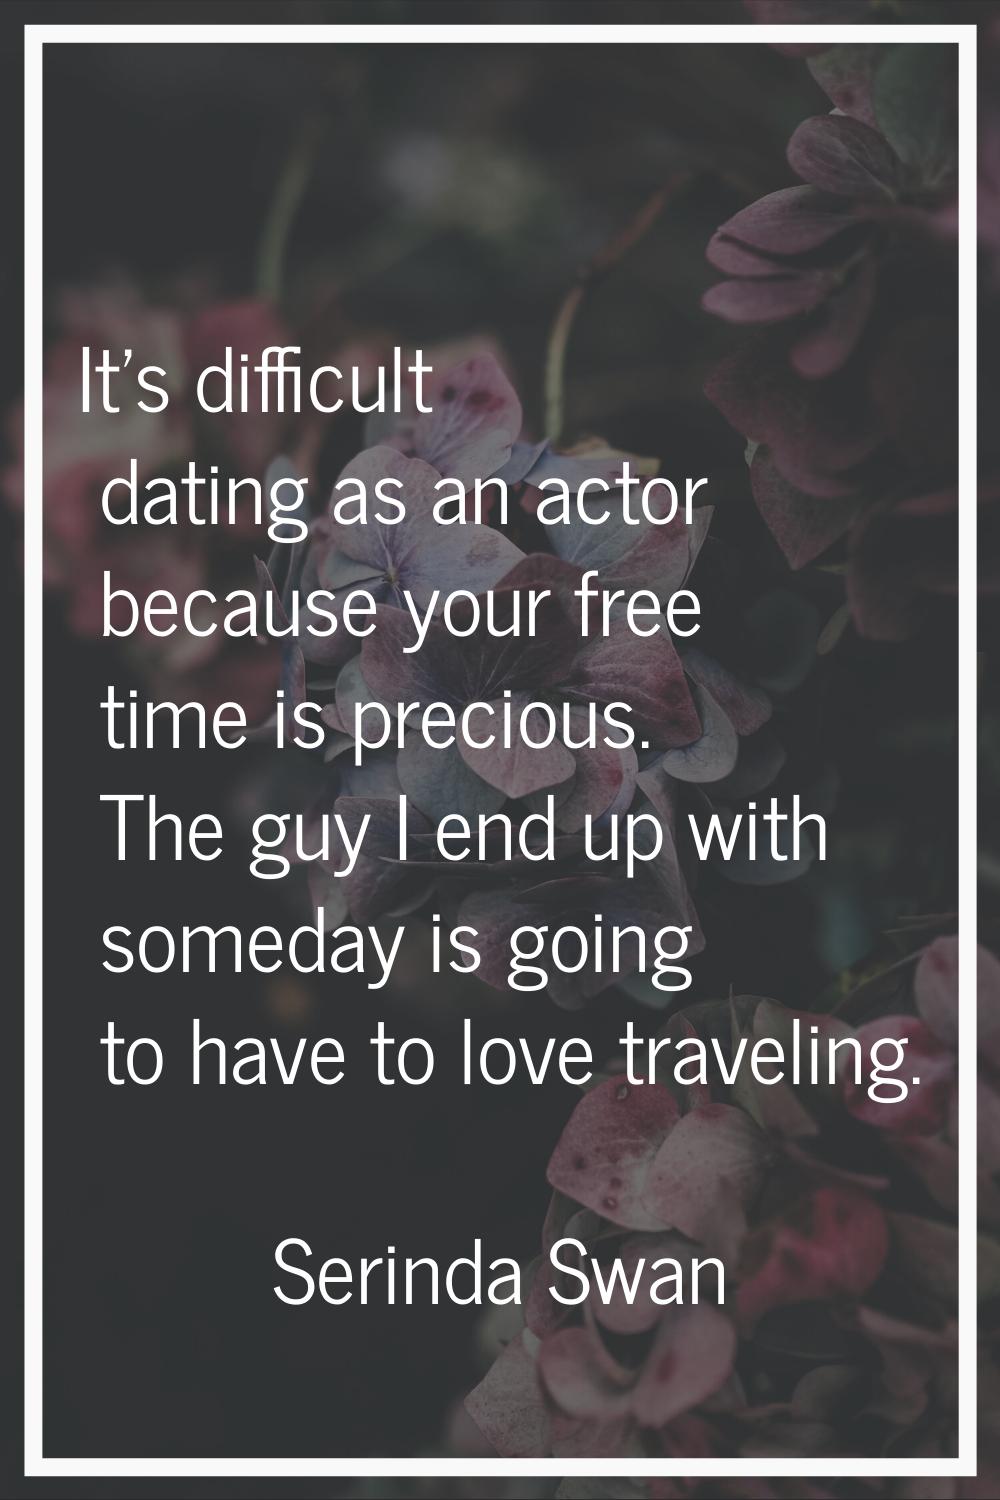 It's difficult dating as an actor because your free time is precious. The guy I end up with someday